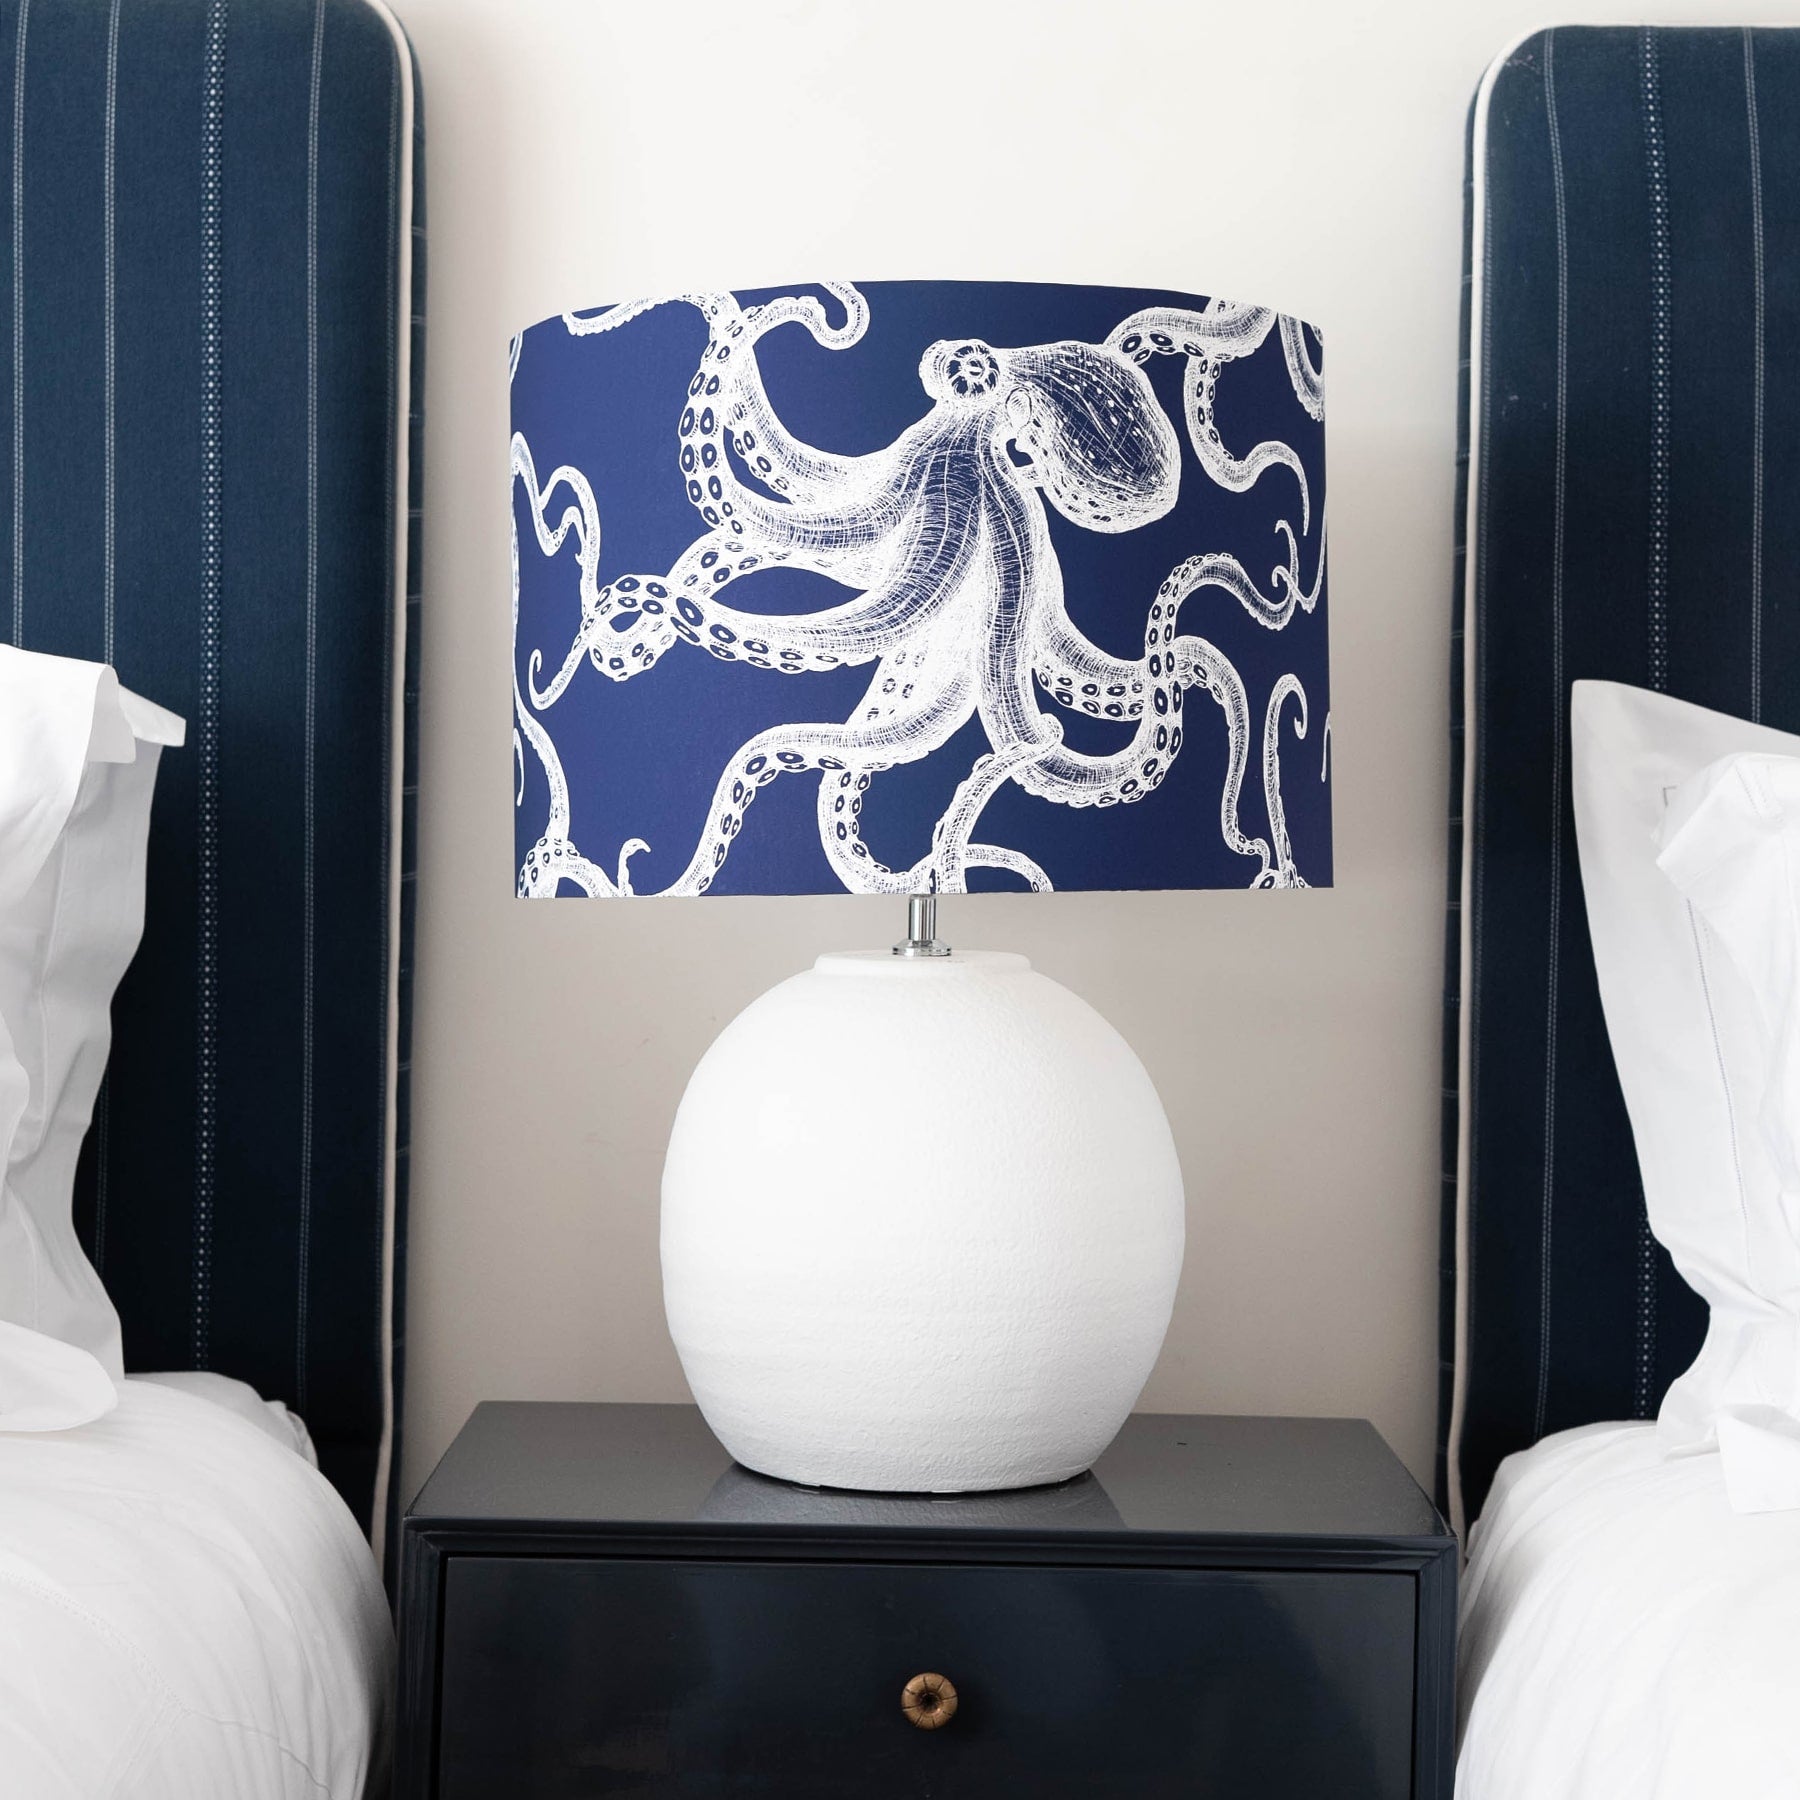 Our Classic Octopus White design on a Navy background on a White lampbase placed on a navy bedside table in between two single beds.